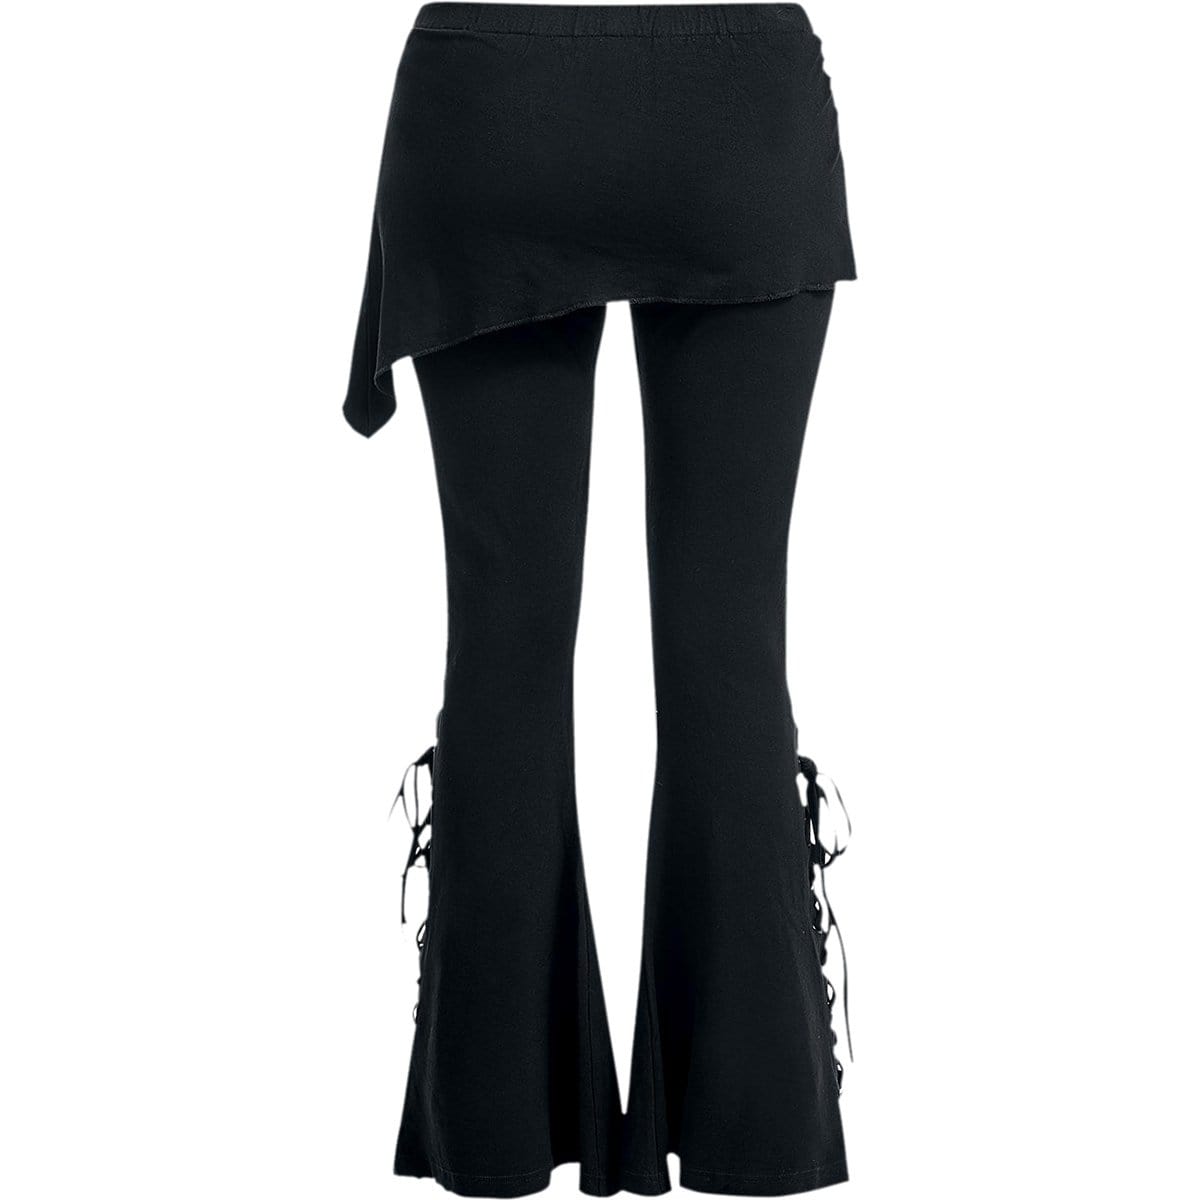 Spiral Direct Gothic BAT'S HEART - 2in1 Boot-Cut Leggings with